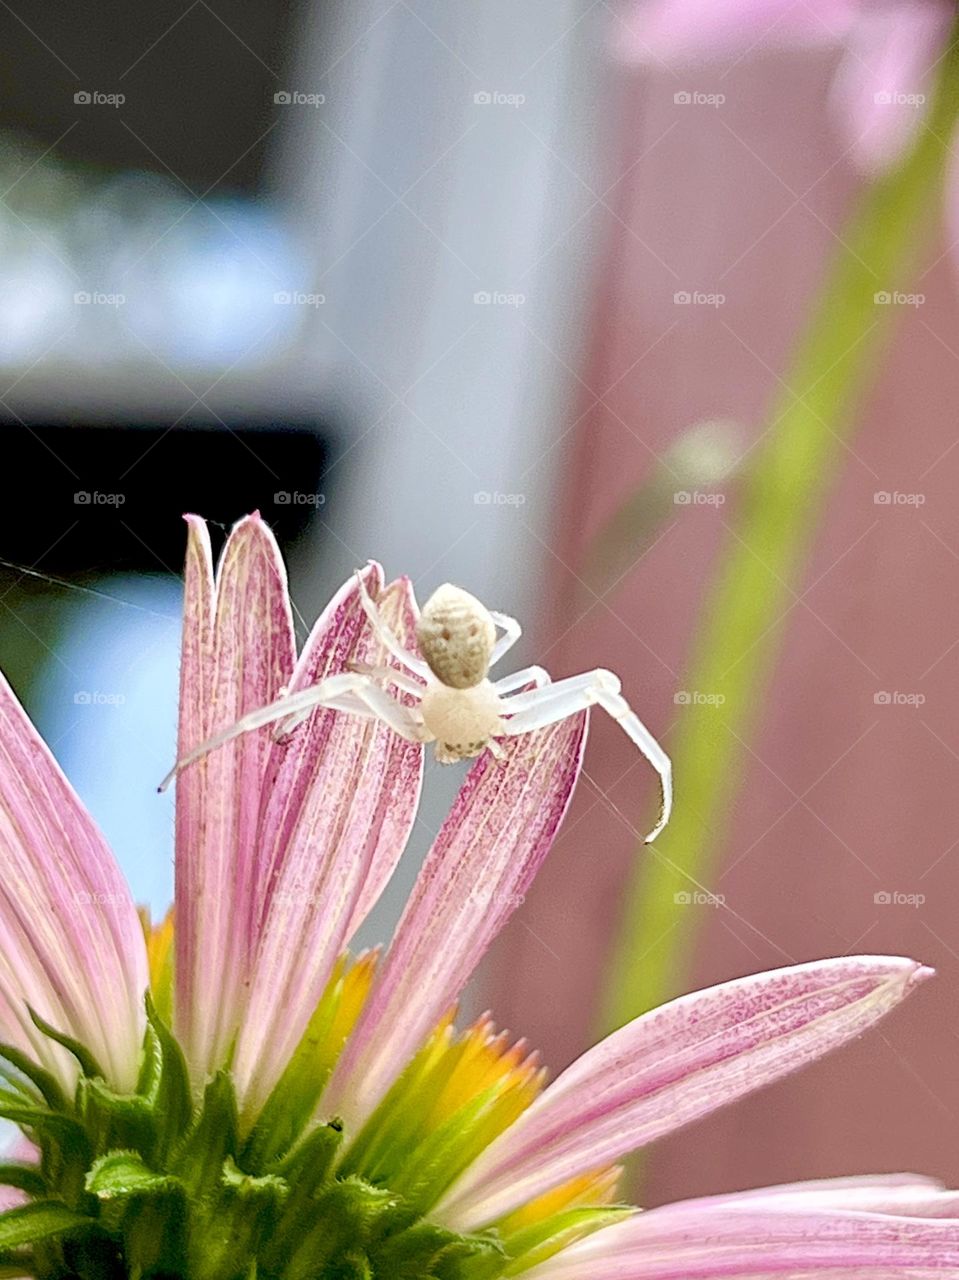 Tiny ghost crb spider on pink echinacea petals. Part of her web and the flower are in frame.